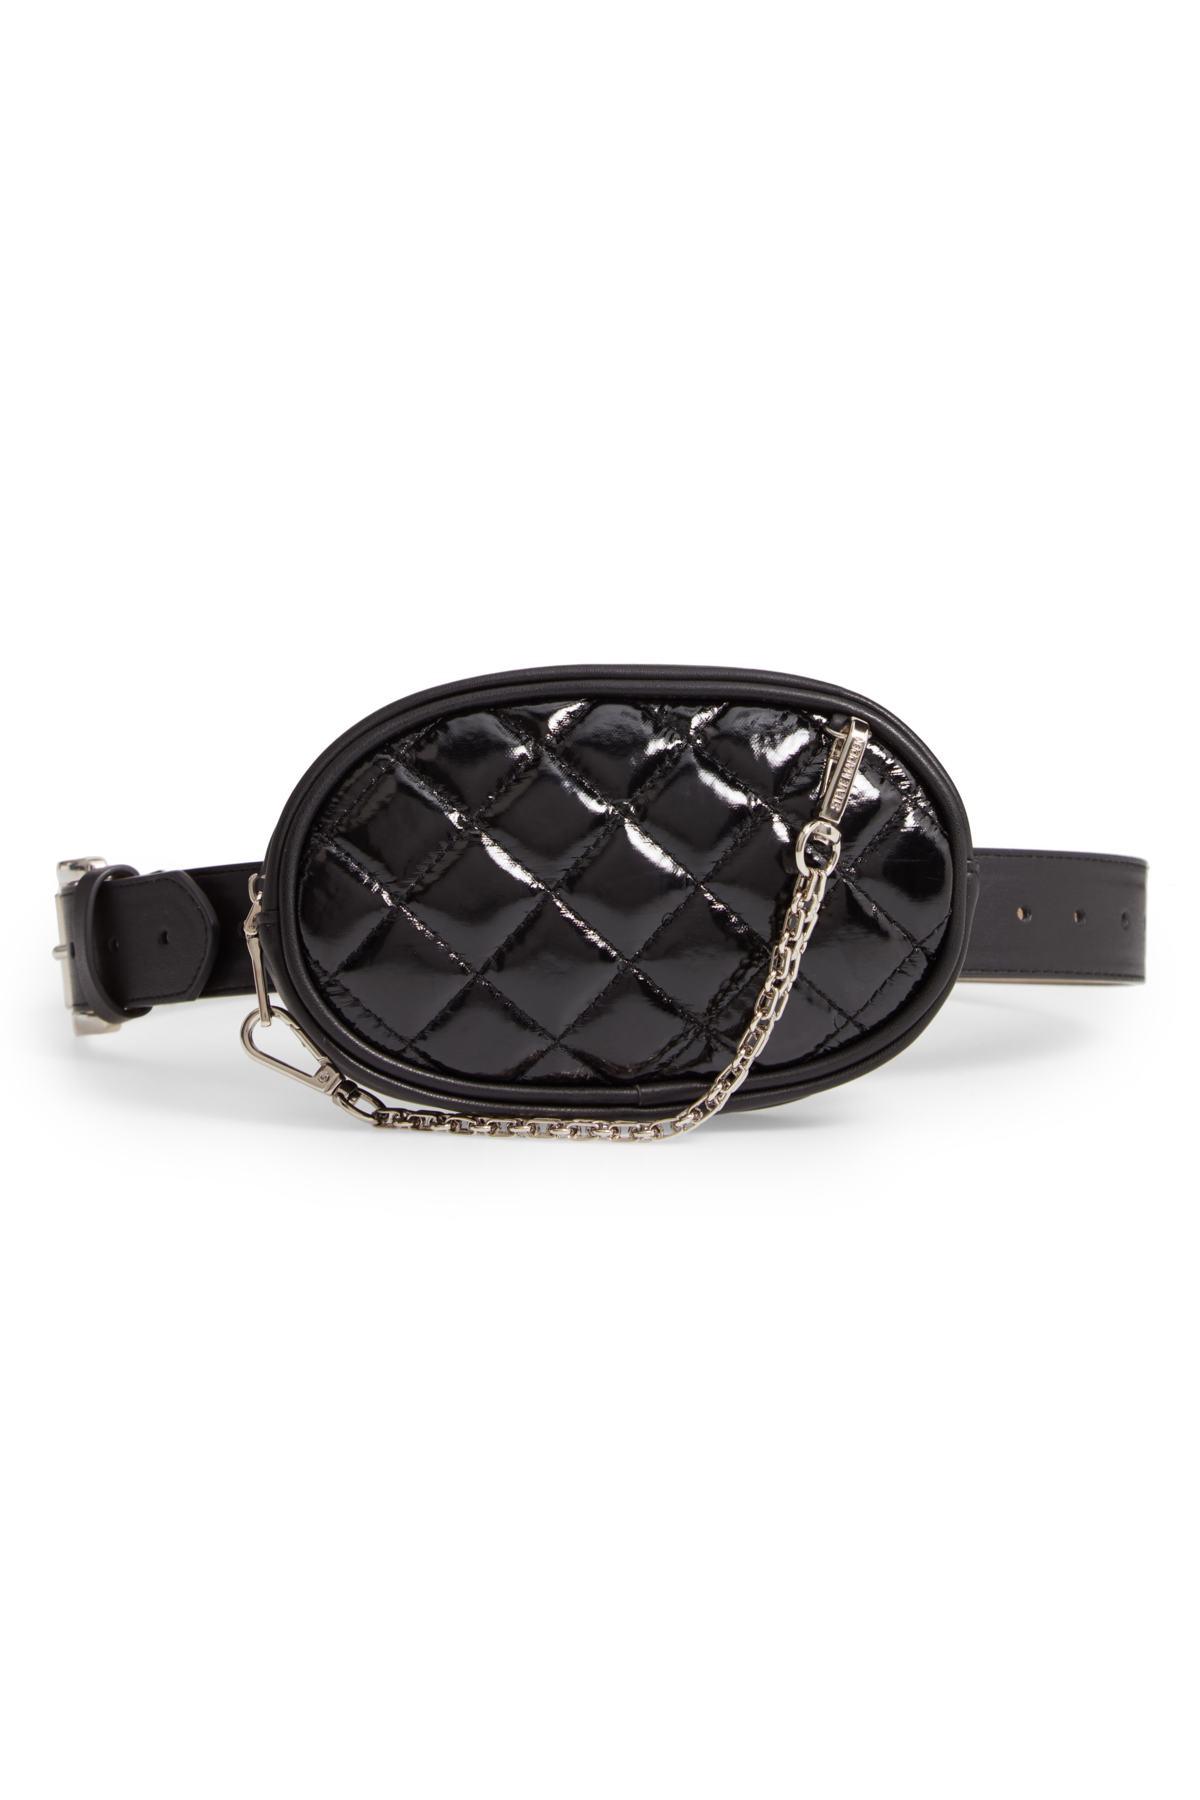 Lyst - Steve Madden Quilted Faux Leather Belt Bag in Black